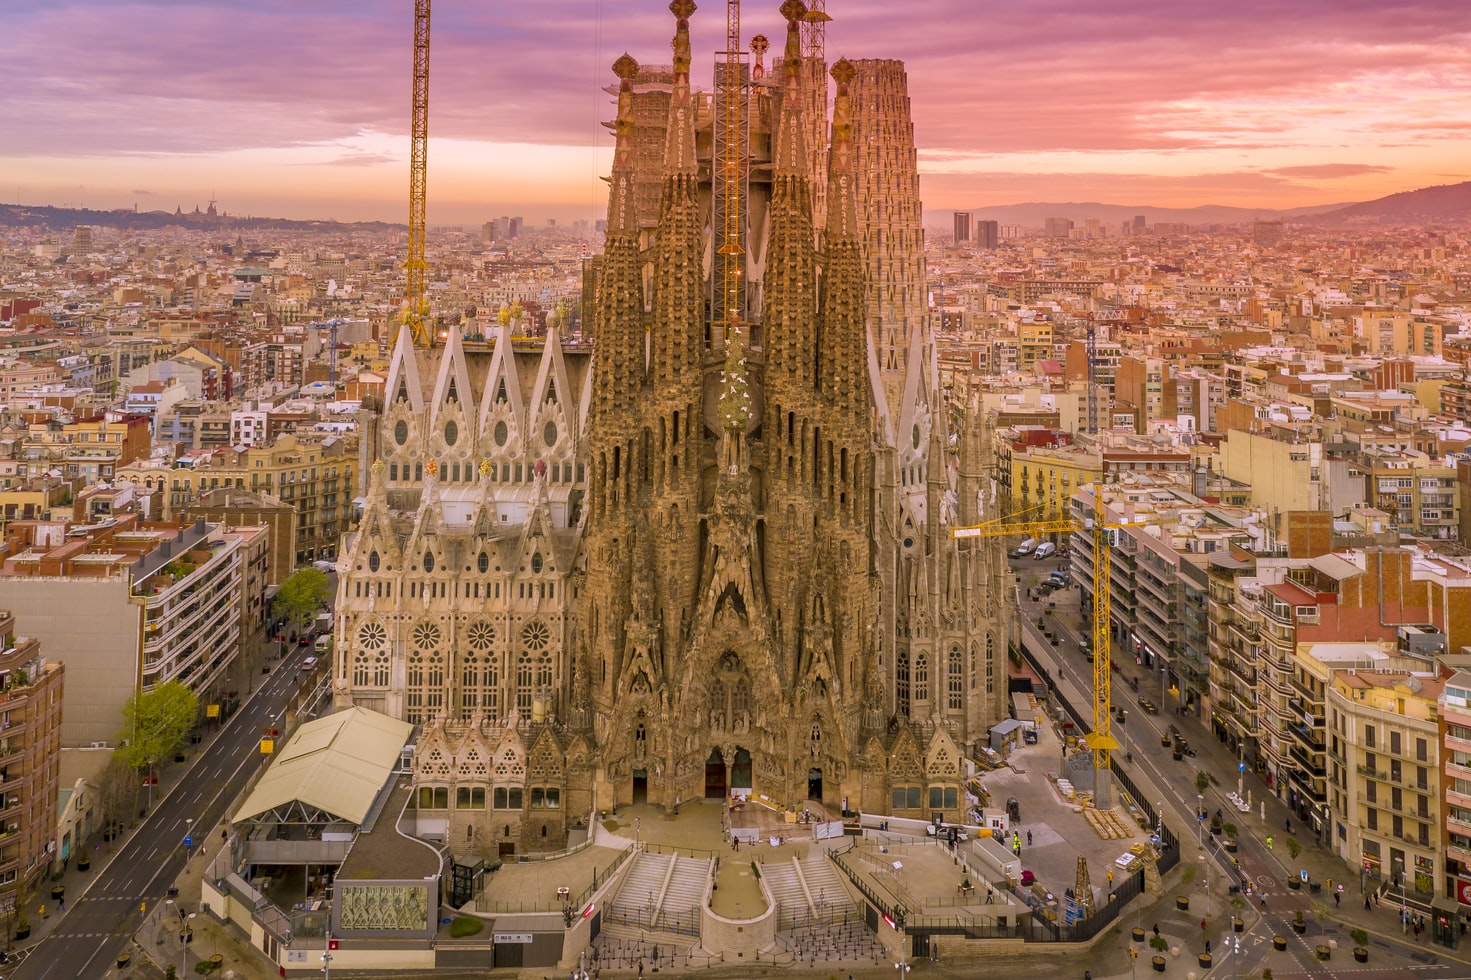 5 famous churches in Spain that you cannot miss